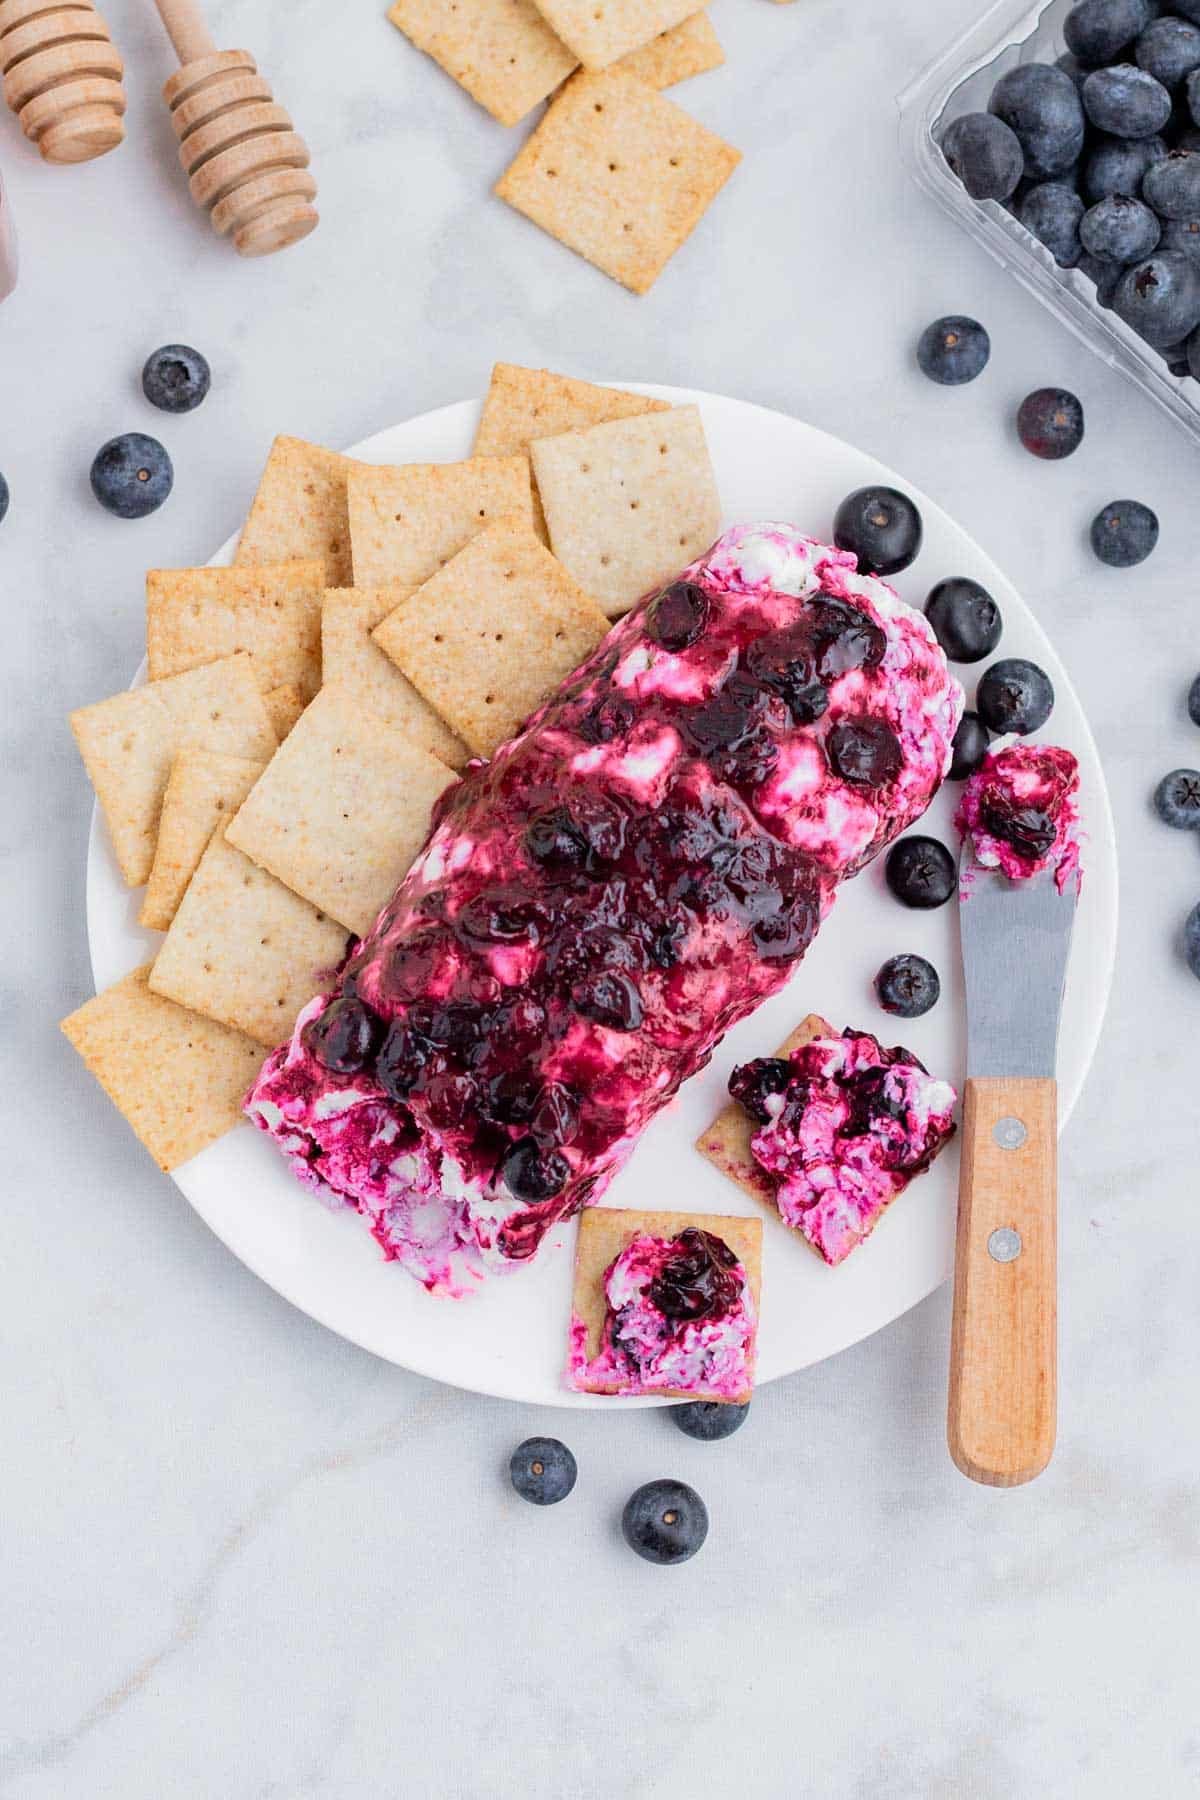 Blueberry goat cheese is spread on crackers with a cheese knife.